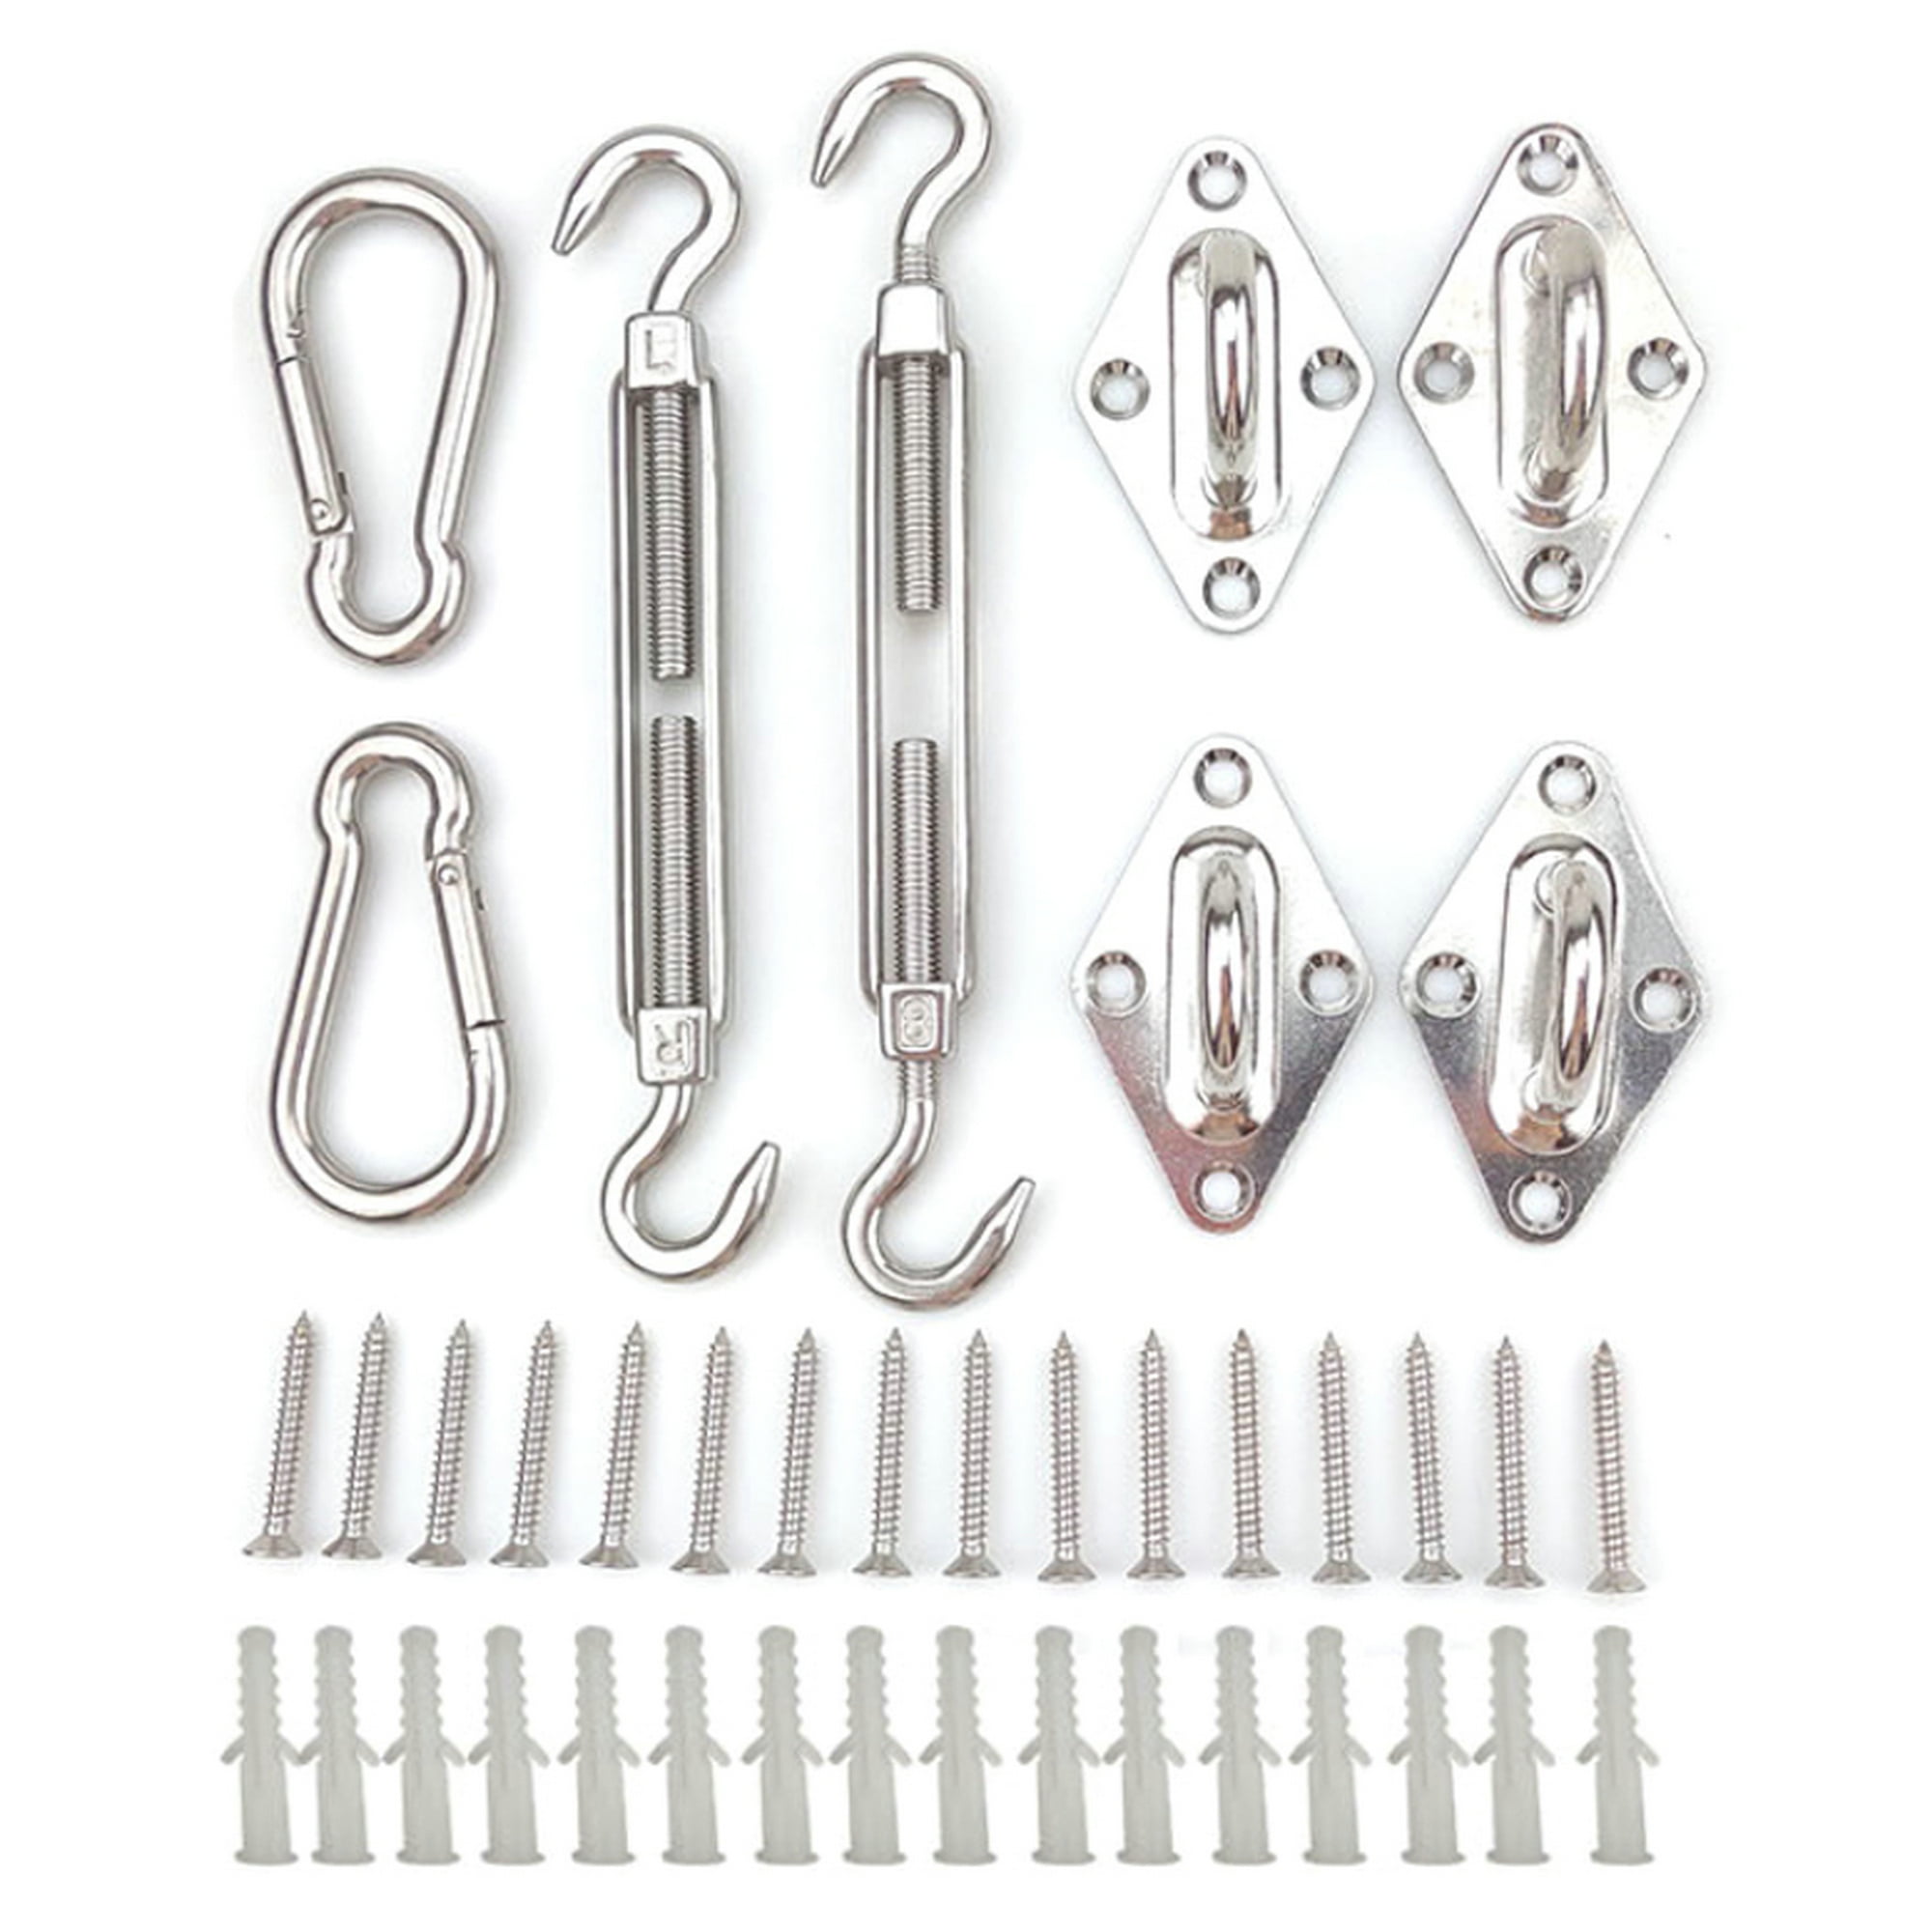 Stainless Steel Accessory Fixing Kit for Triangle Shade Sails